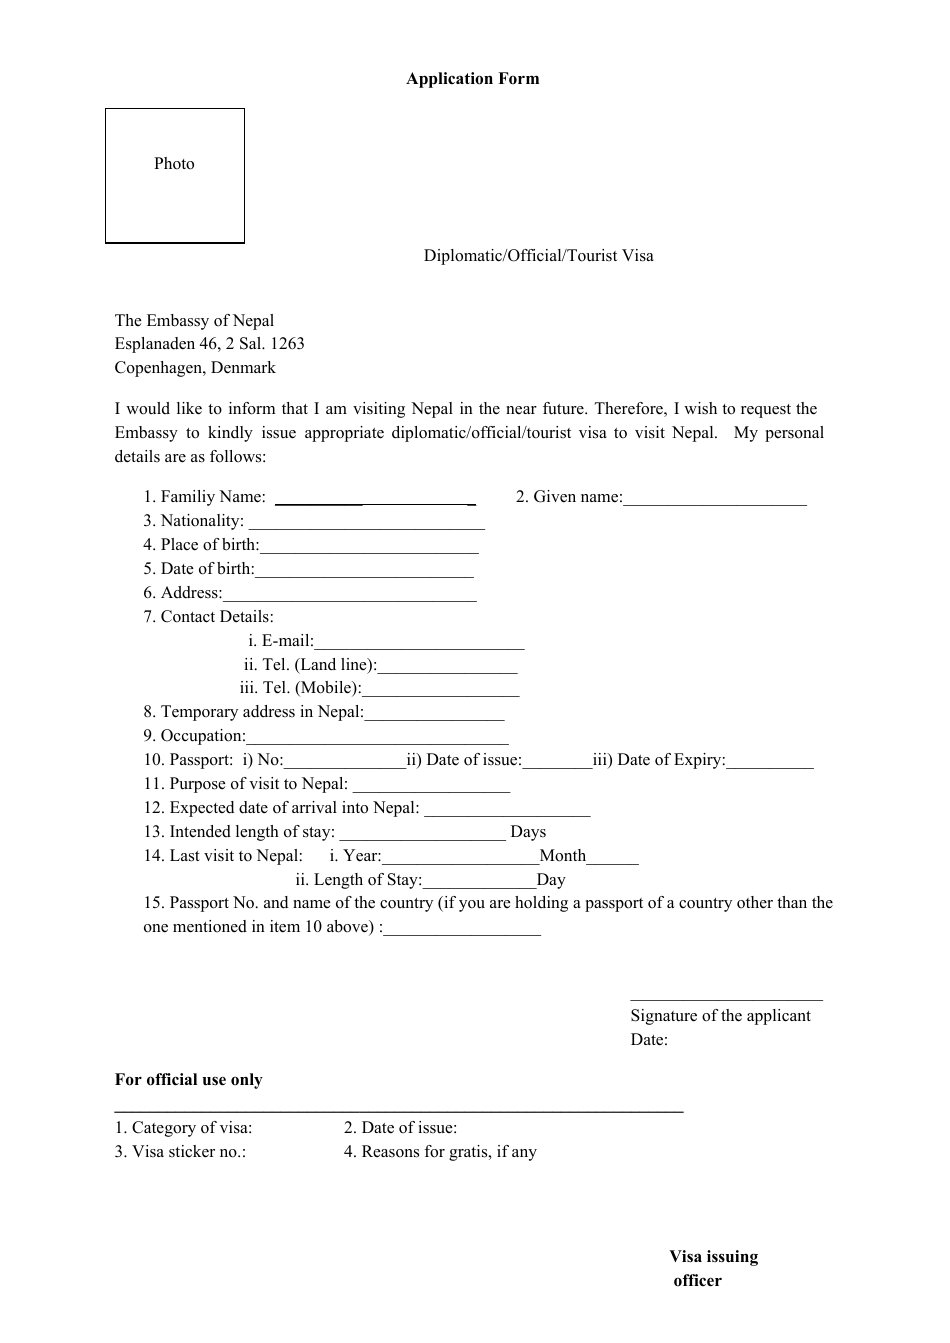 Nepal Diplomatic / Official / Tourist Visa Application Form - the Embassy of Nepal - City of Copenhagen, Denmark, Page 1